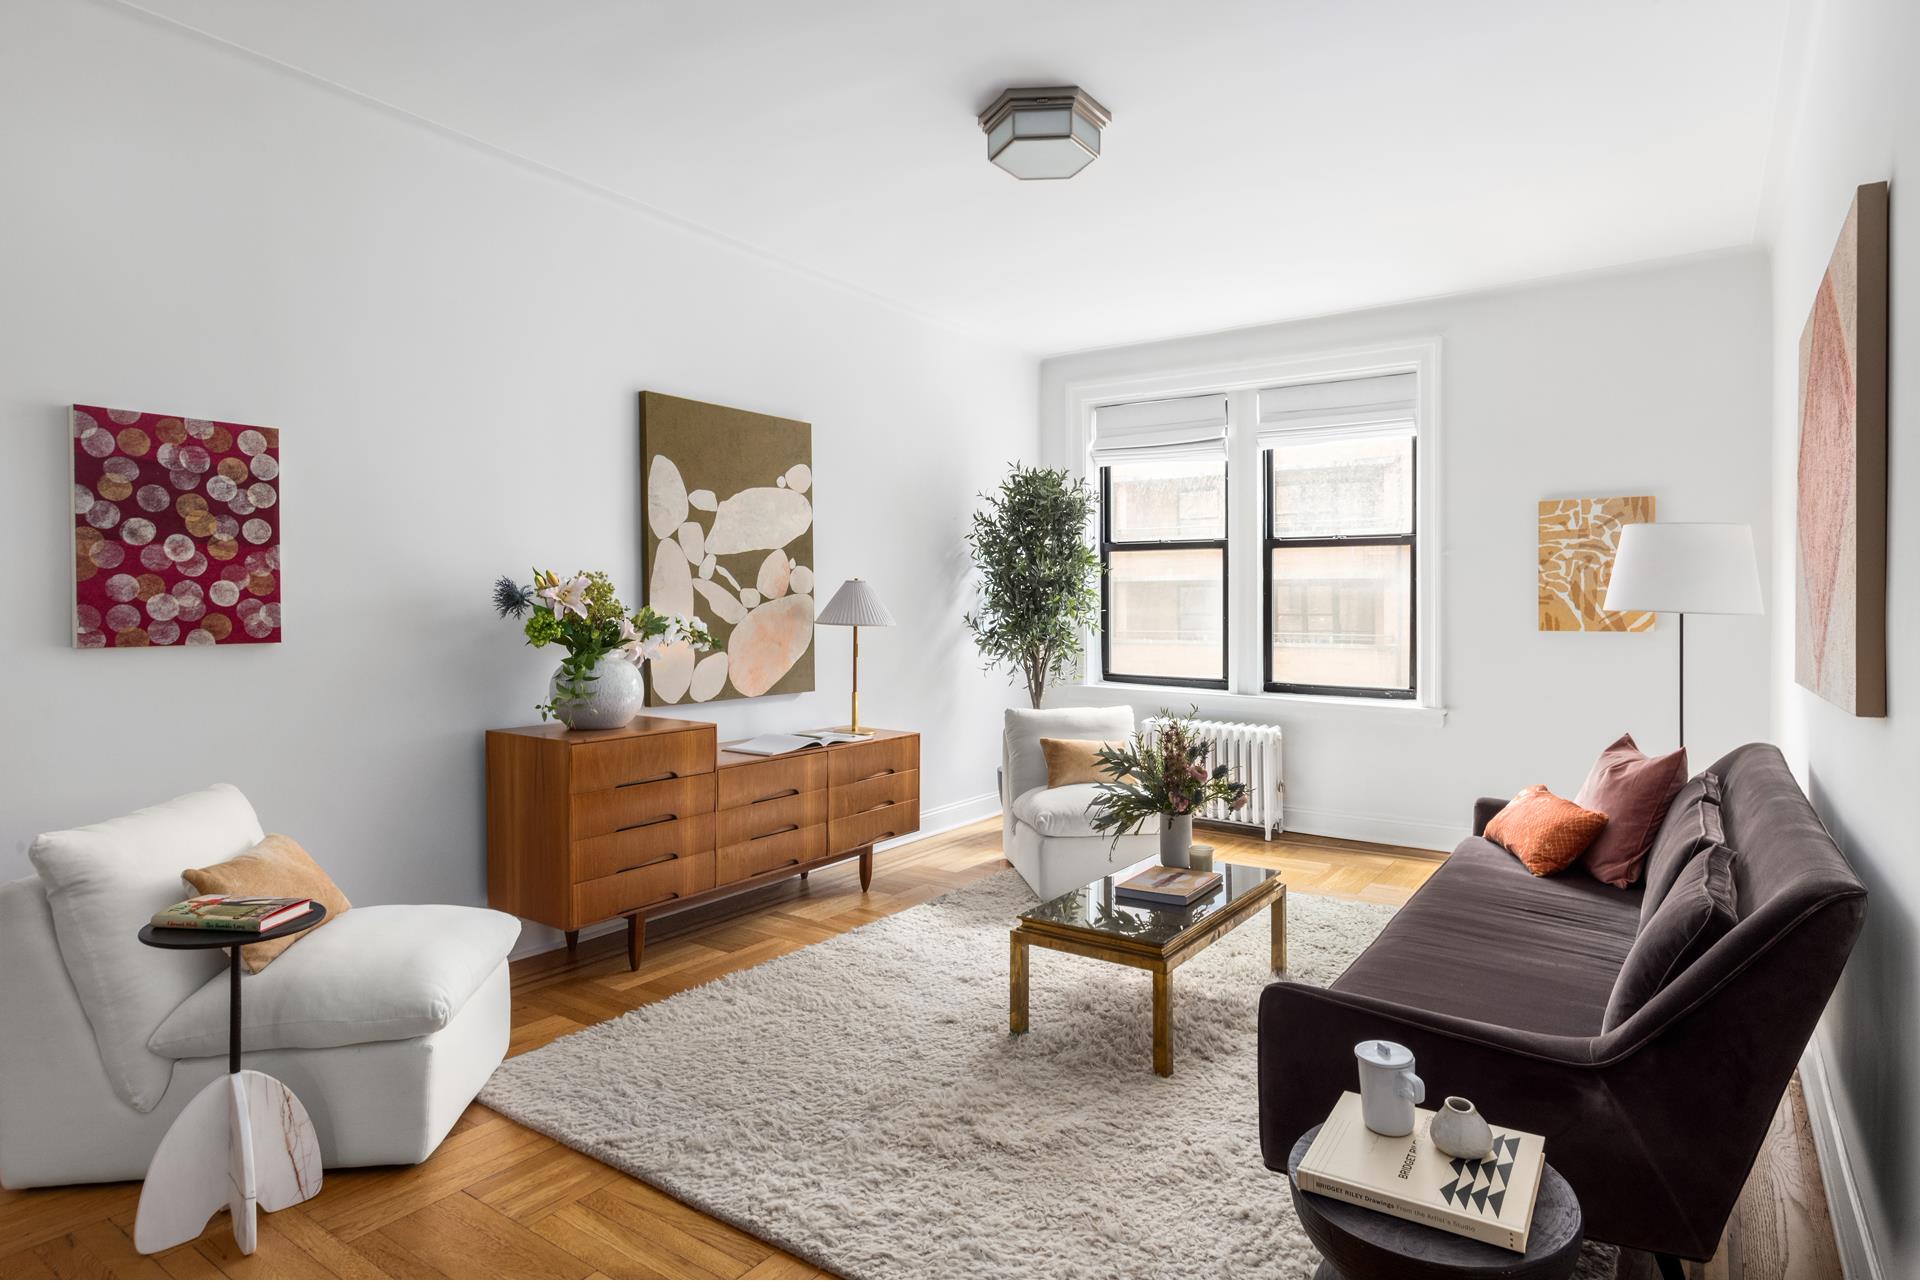 99 East 4th Street 4A, East Village, Downtown, NYC - 2 Bedrooms  
2 Bathrooms  
6 Rooms - 